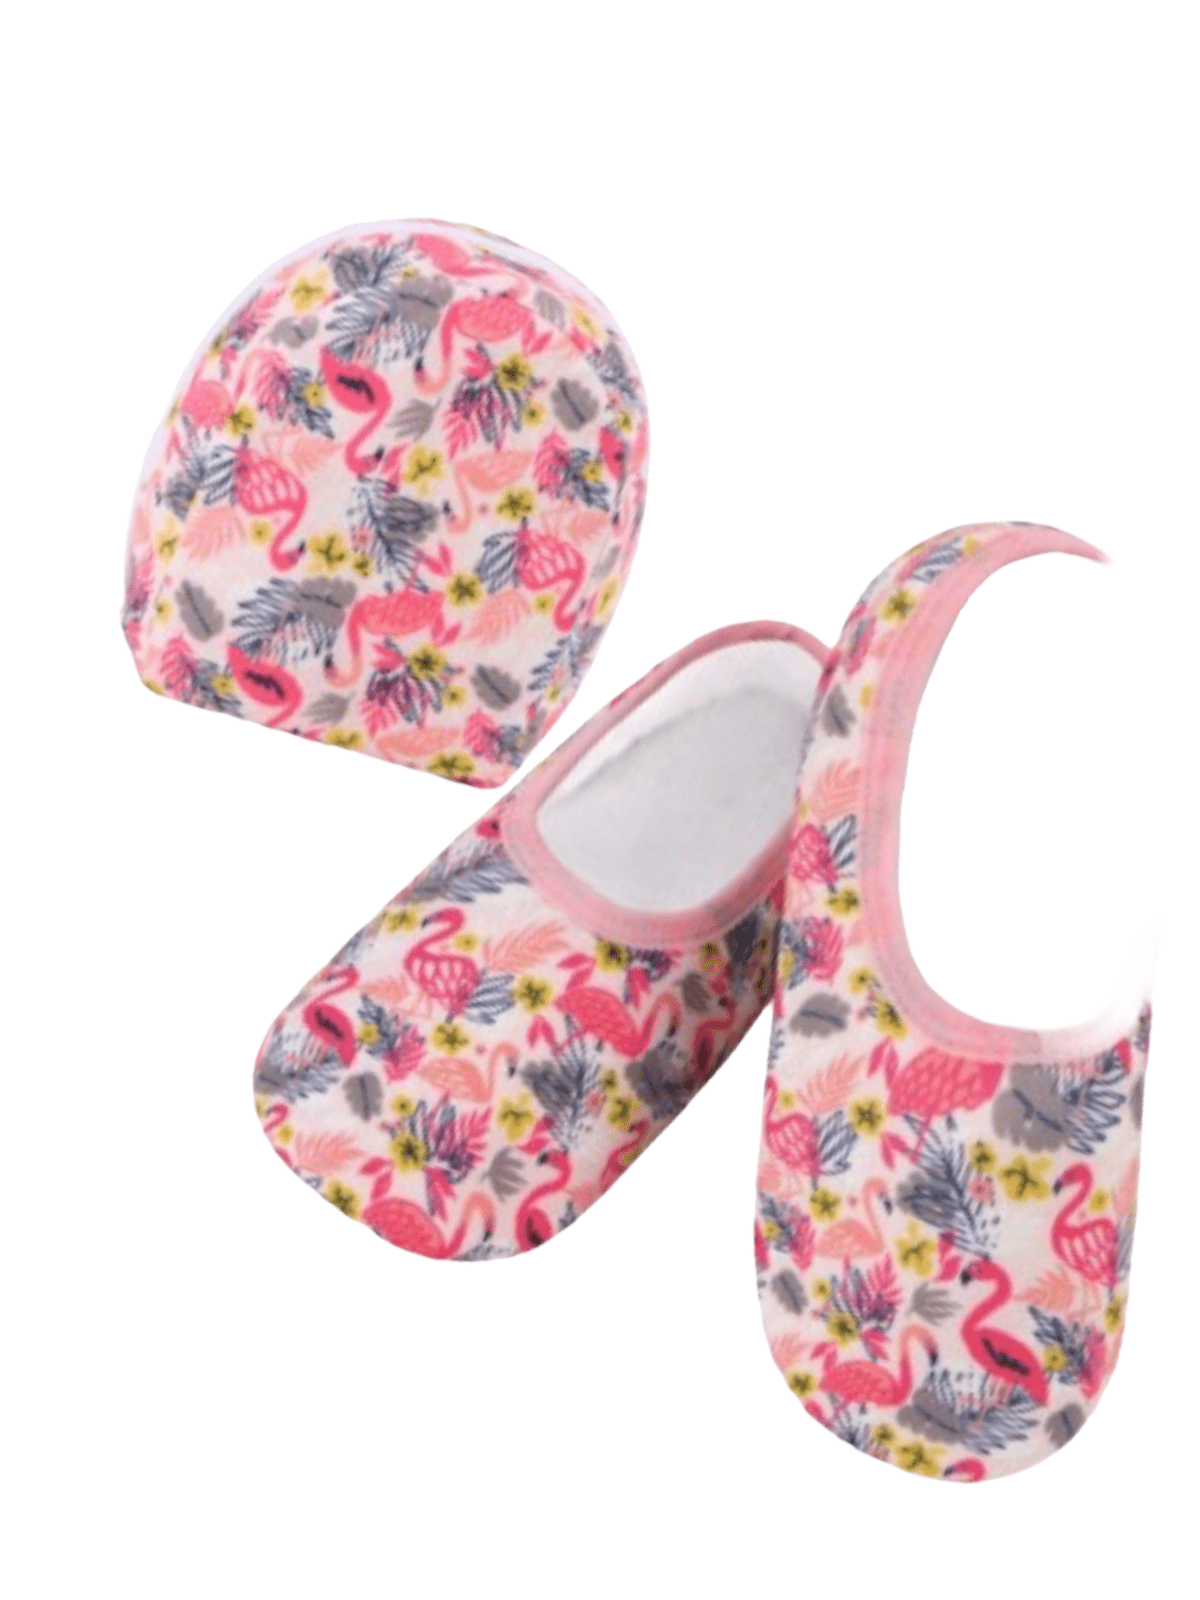 Snoozies Skinnies Travel Pouch Snoozies Slippers Small / Flamingo